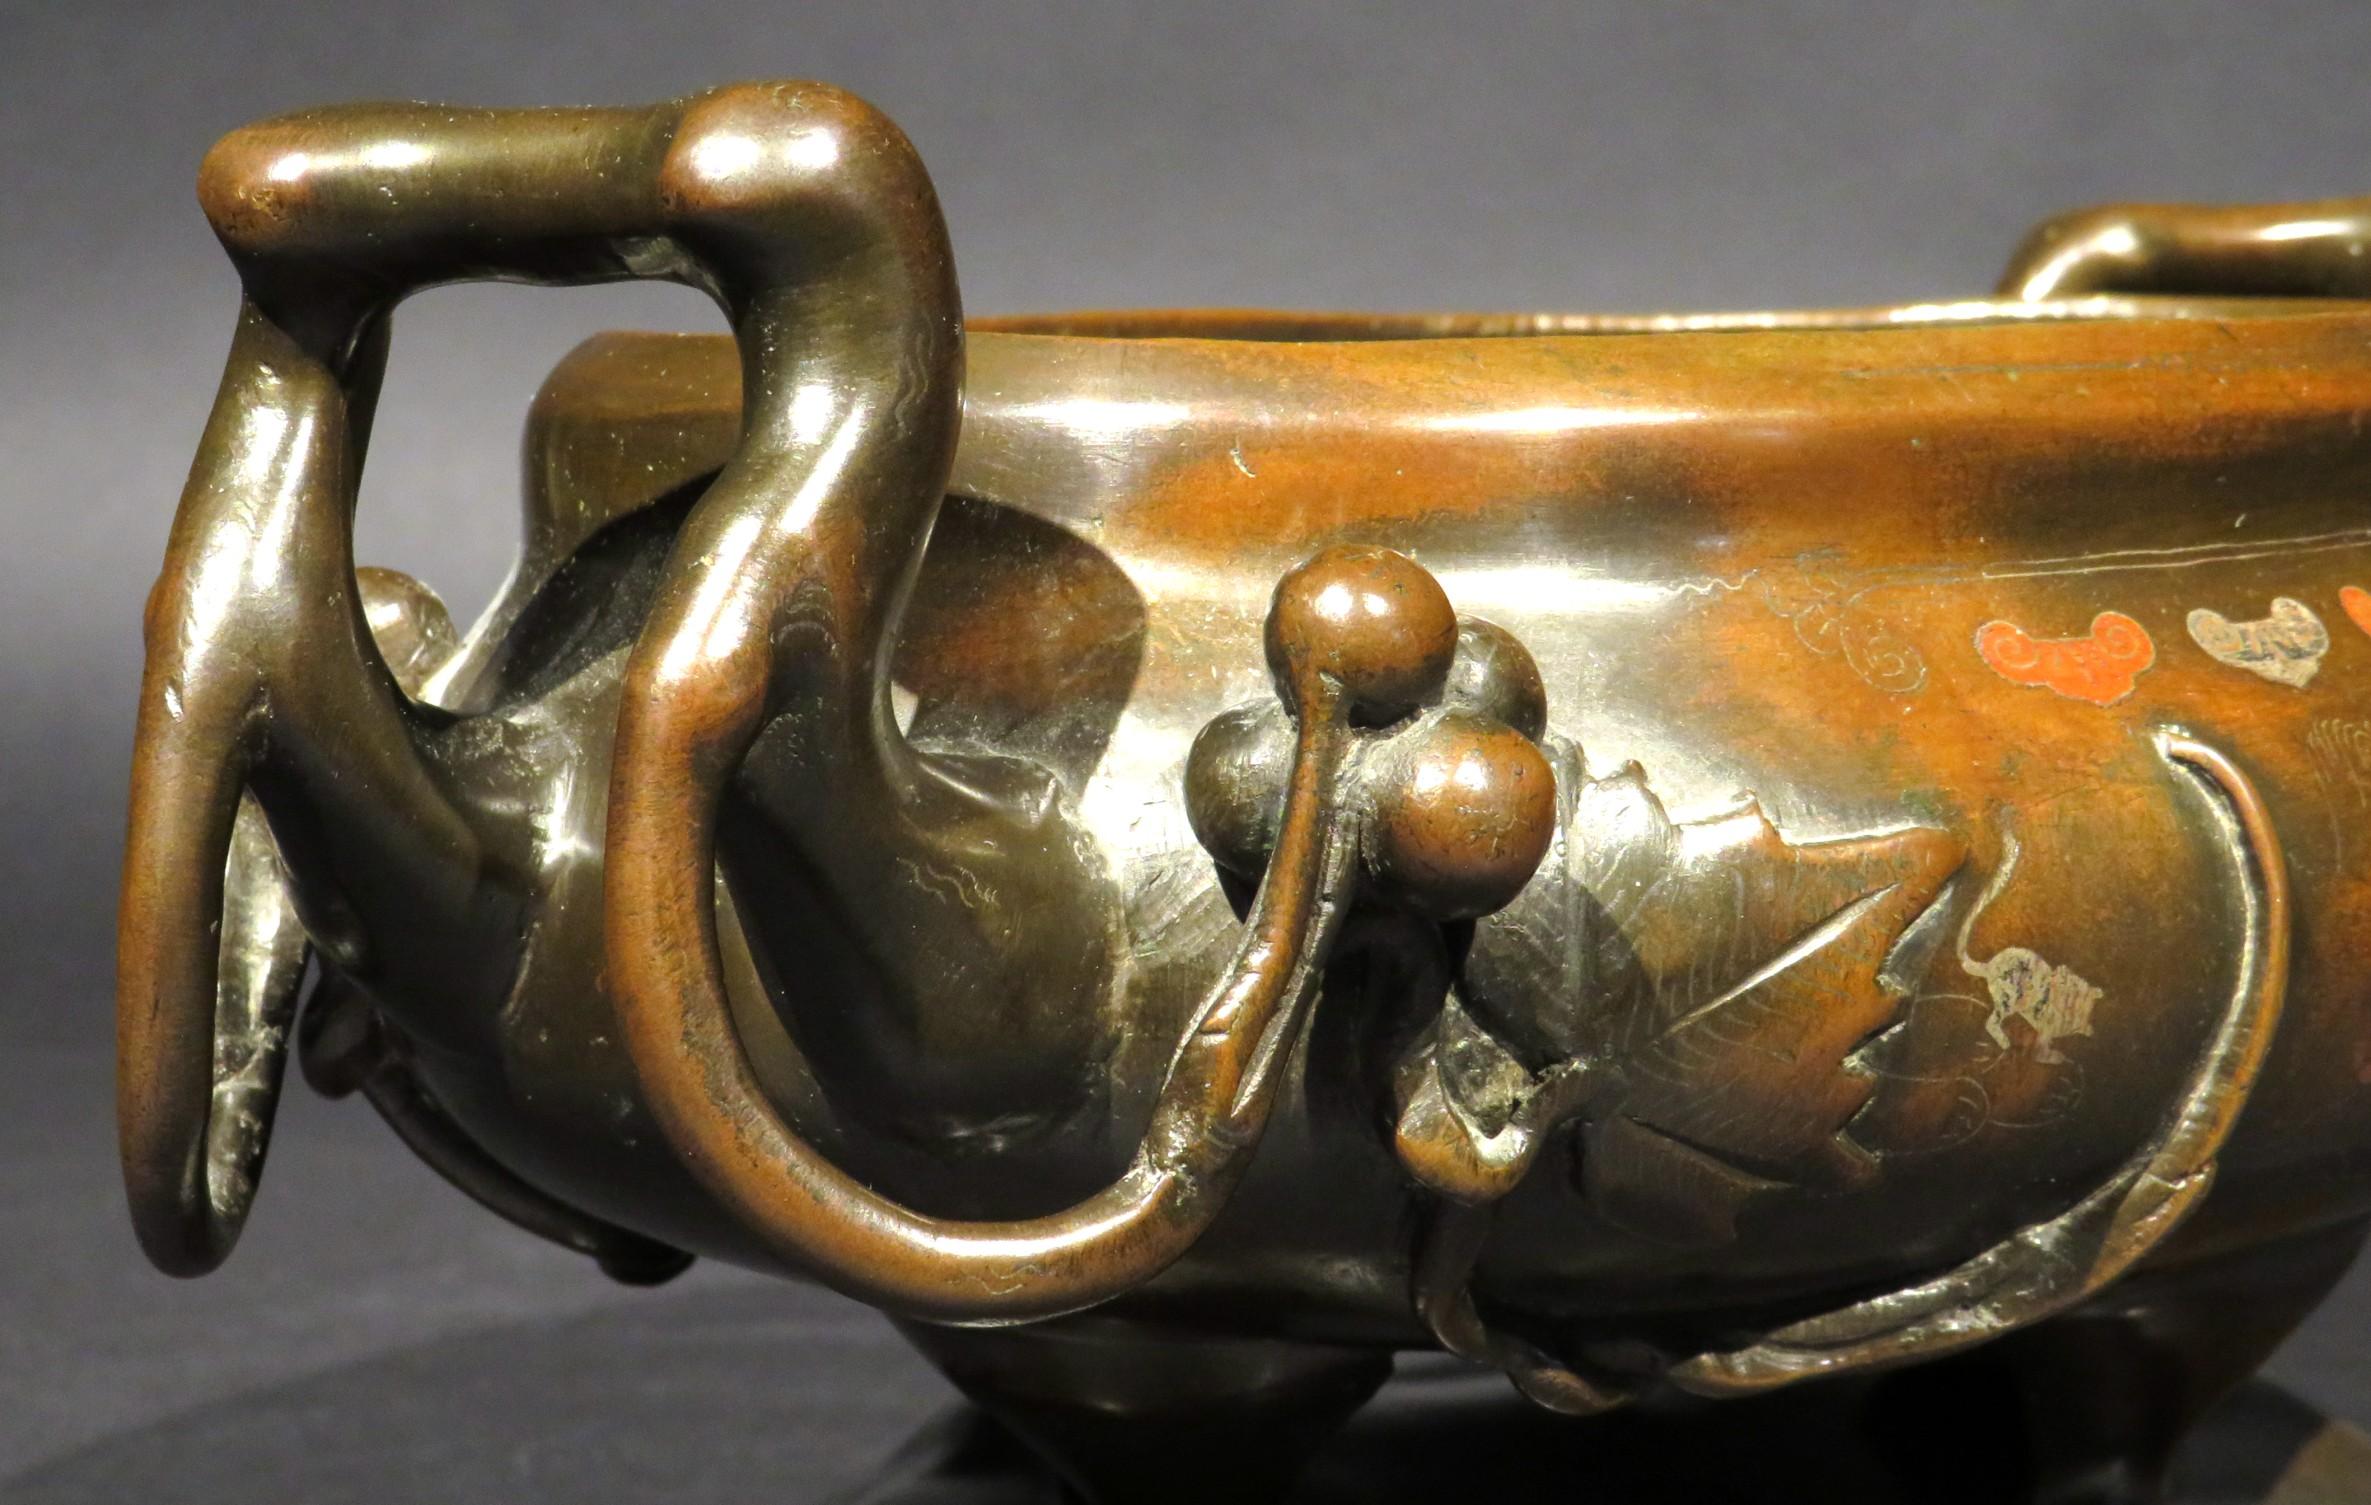 A Very Fine Japanese Mixed Metal Bronze Doban / Suiban, Meiji Period (1868-1912) For Sale 6